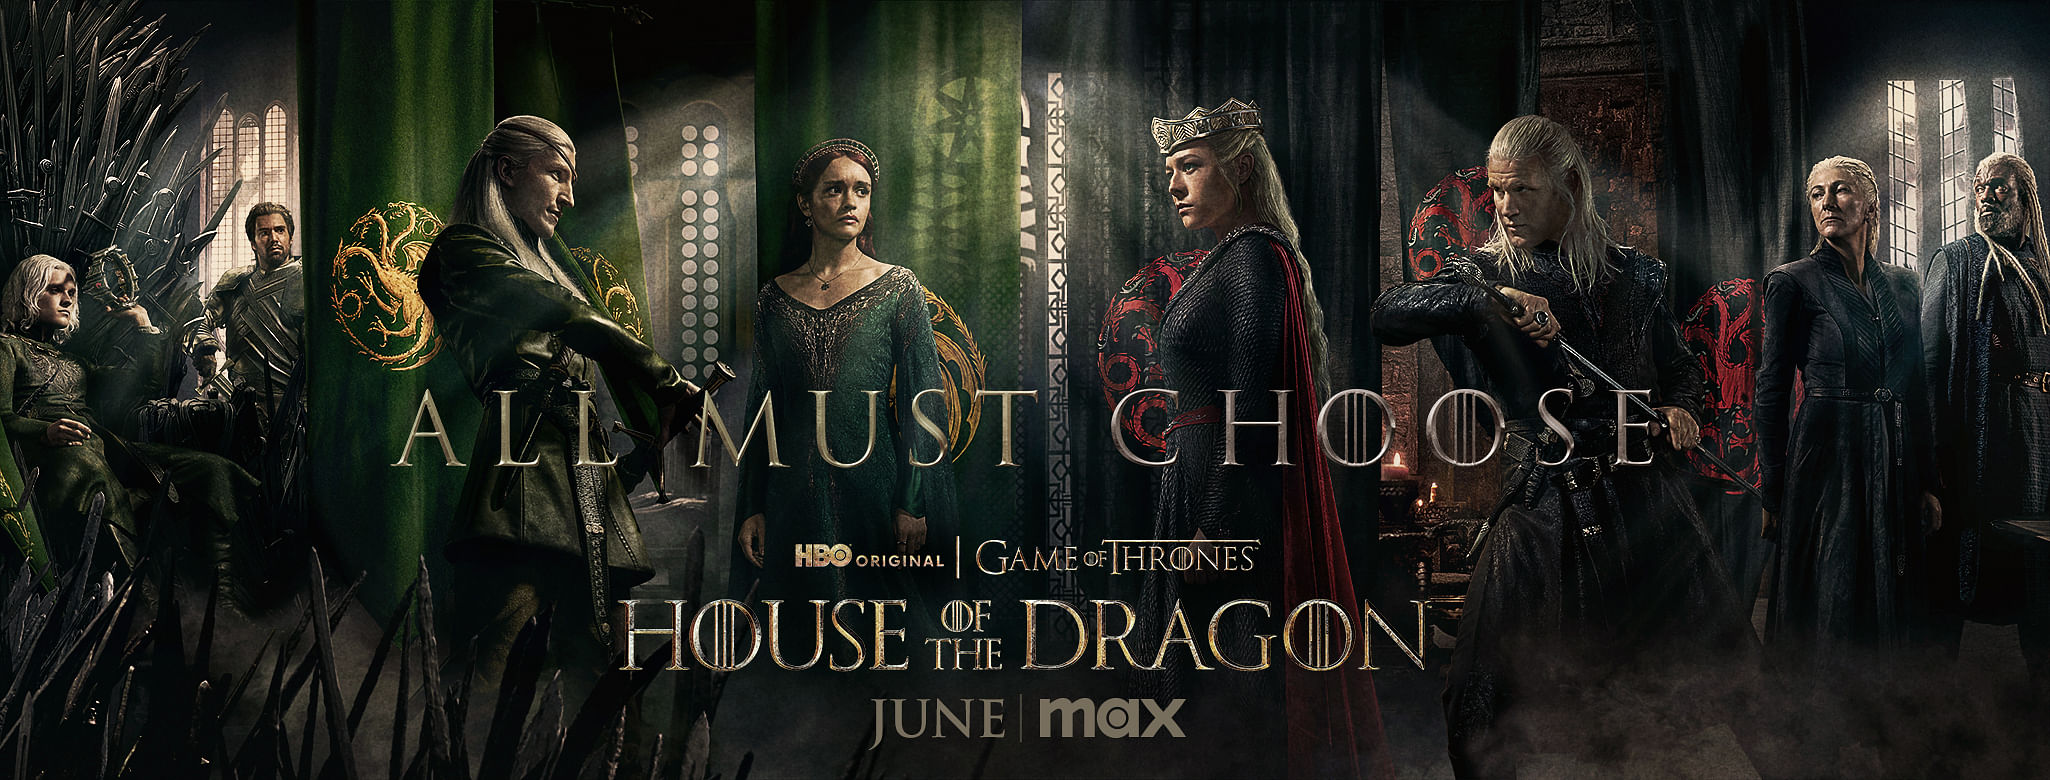 House of the Dragon' season 2 posters drop ahead of trailer release | The Daily Star